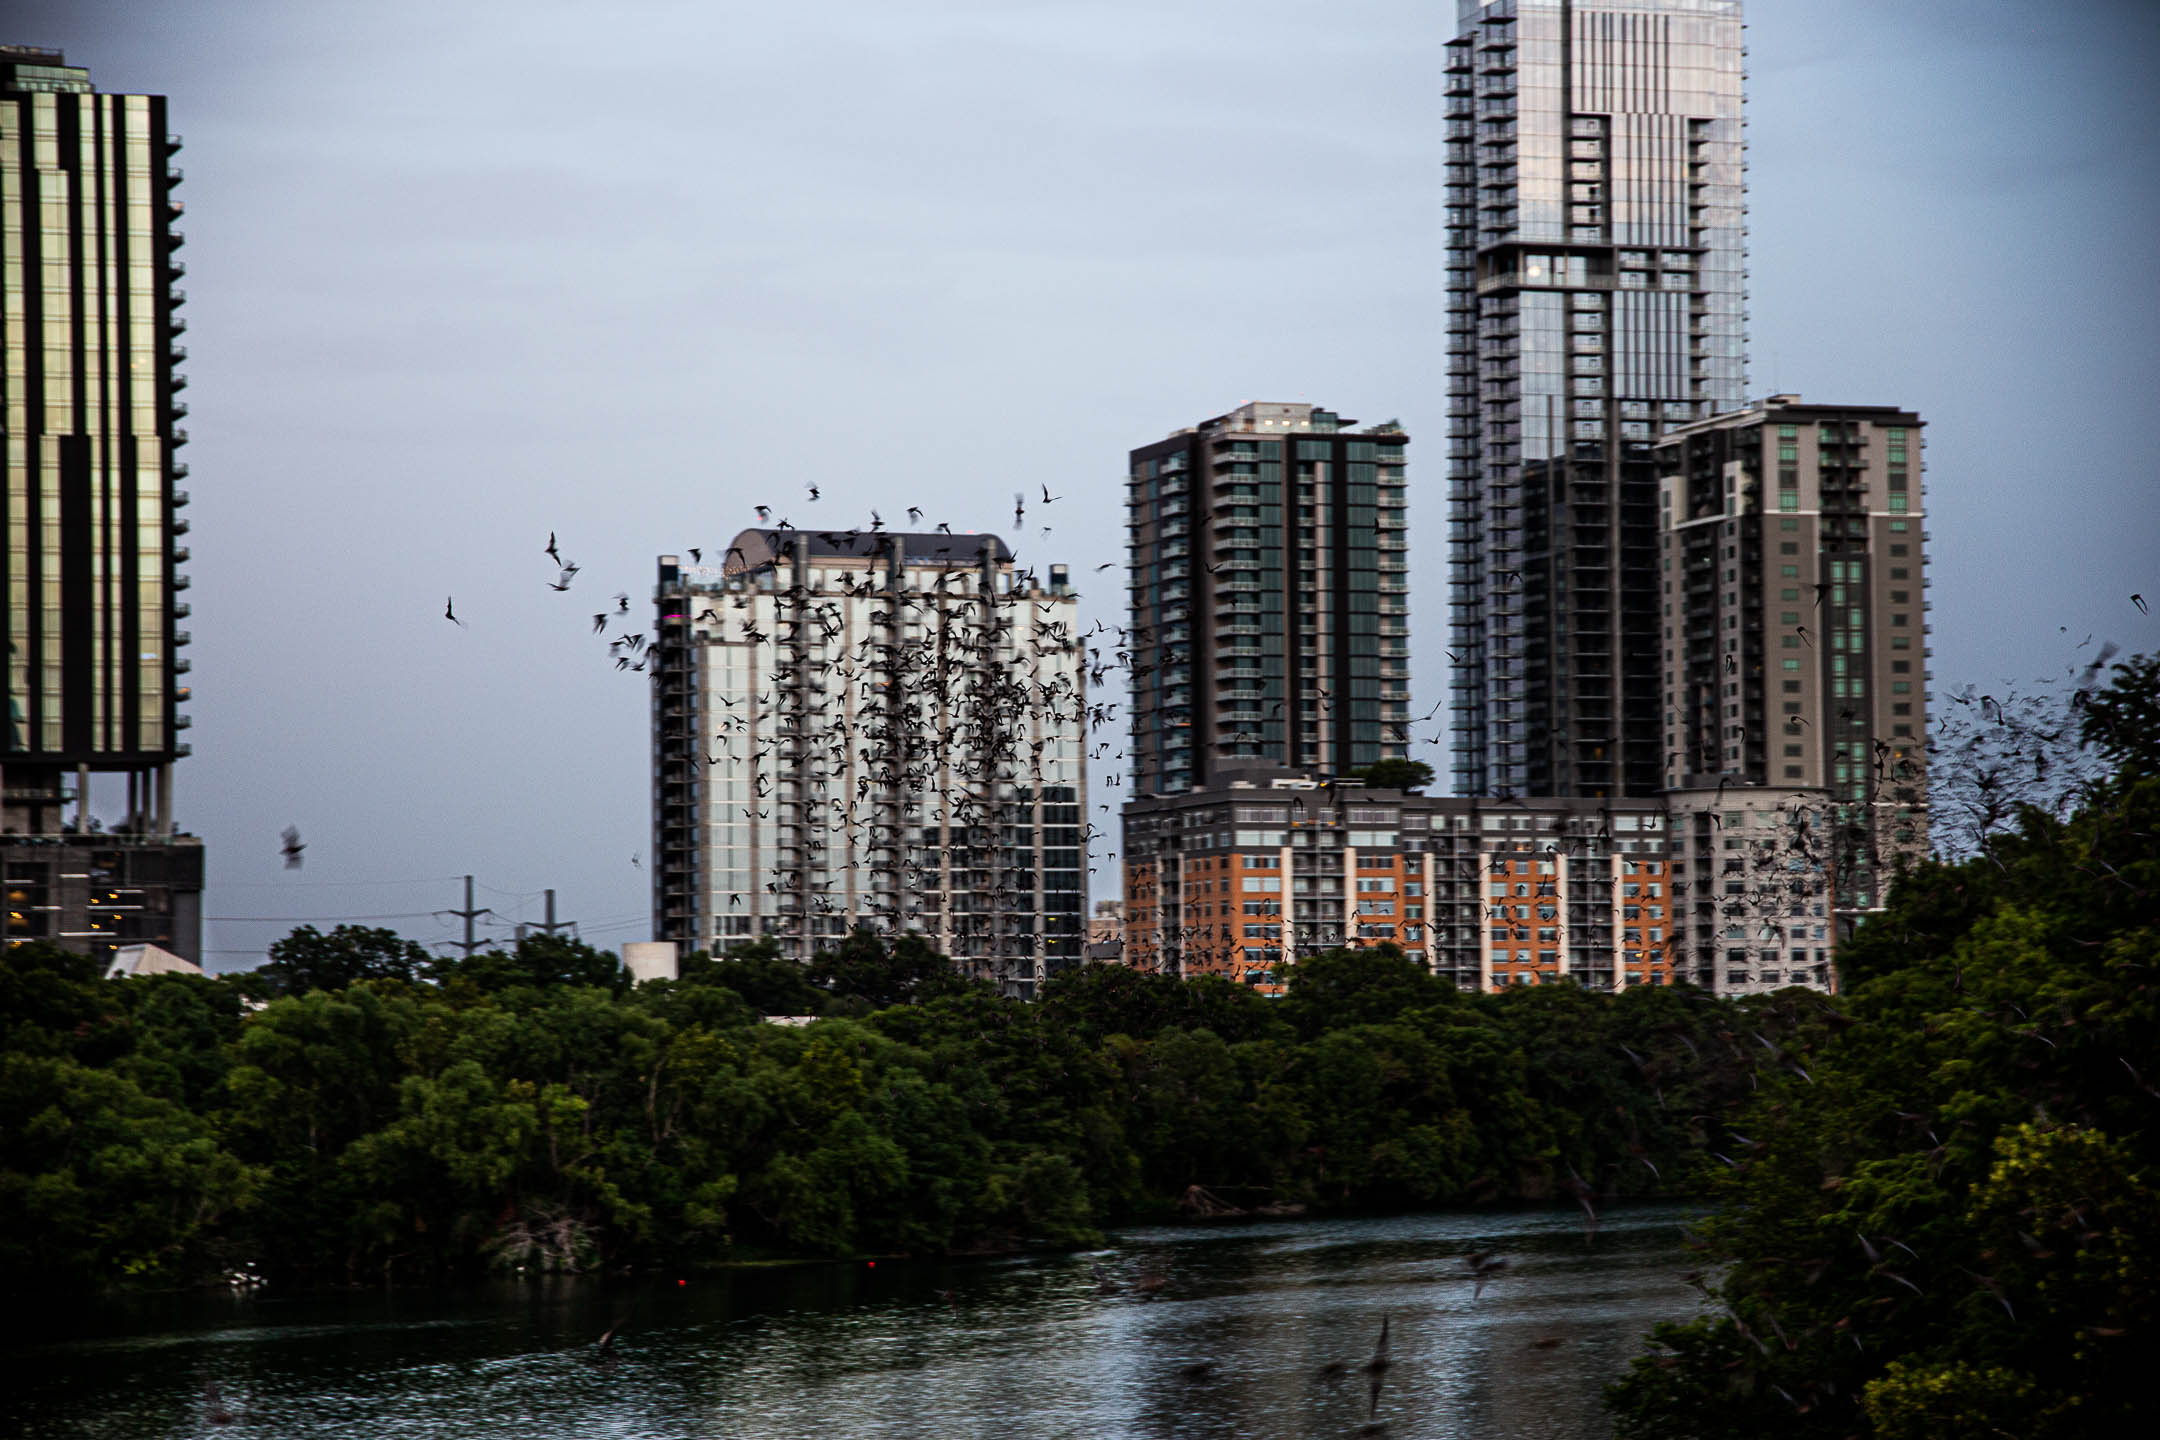 Several tall buildings stand behind trees on a riverbank. A flock of birds scatters in front of the buildings, wheeling as a group to move higher. The water reflects the trees and buildings up towards the cloudy sky.